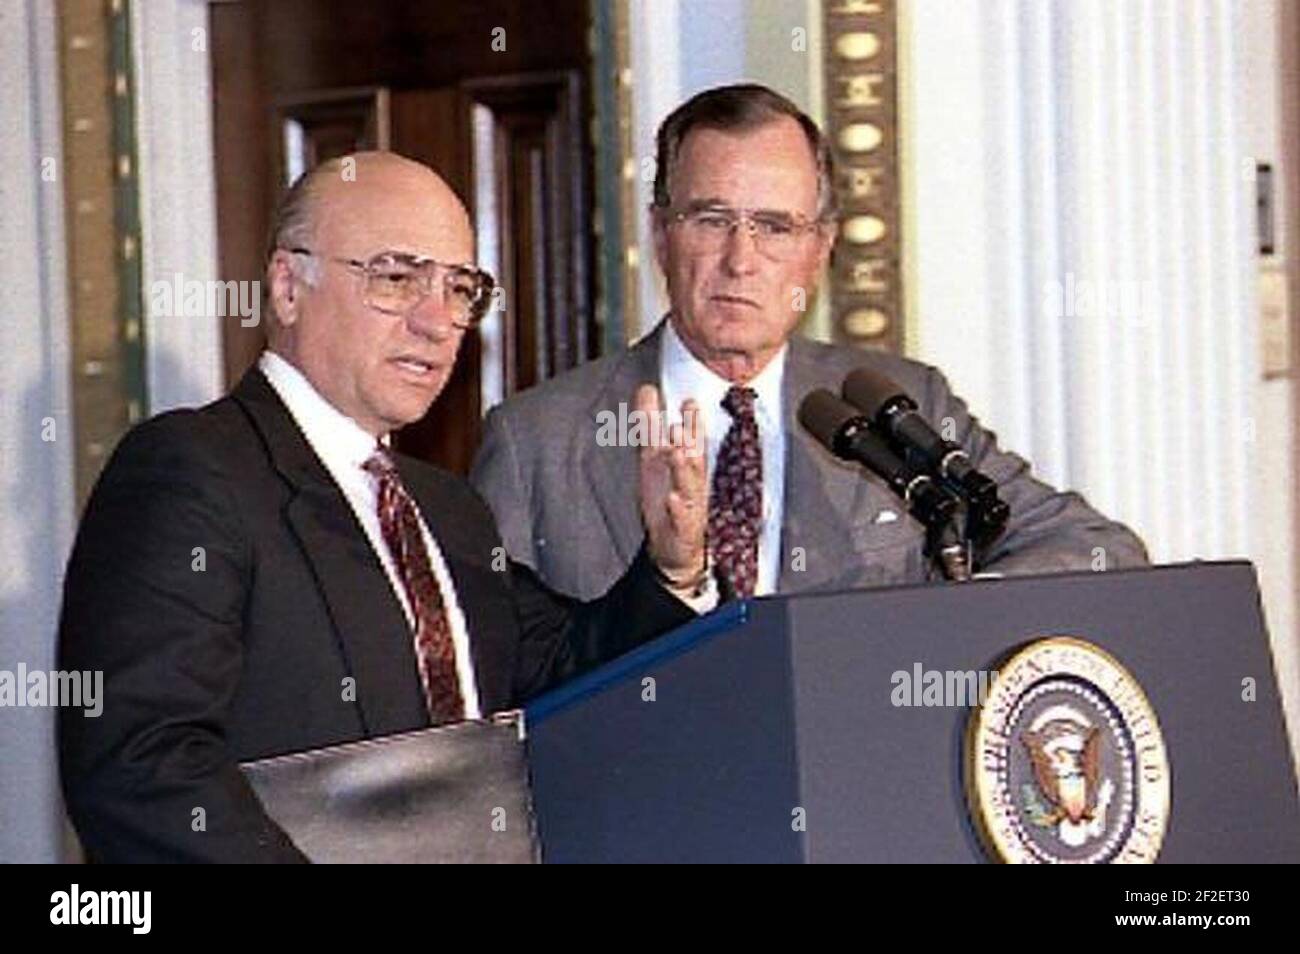 President Bush shares the podium with Secretary Yeutter at a briefing of the National Association of Agricultural Journalists in the Indian Treaty Room of the White House. Stock Photo